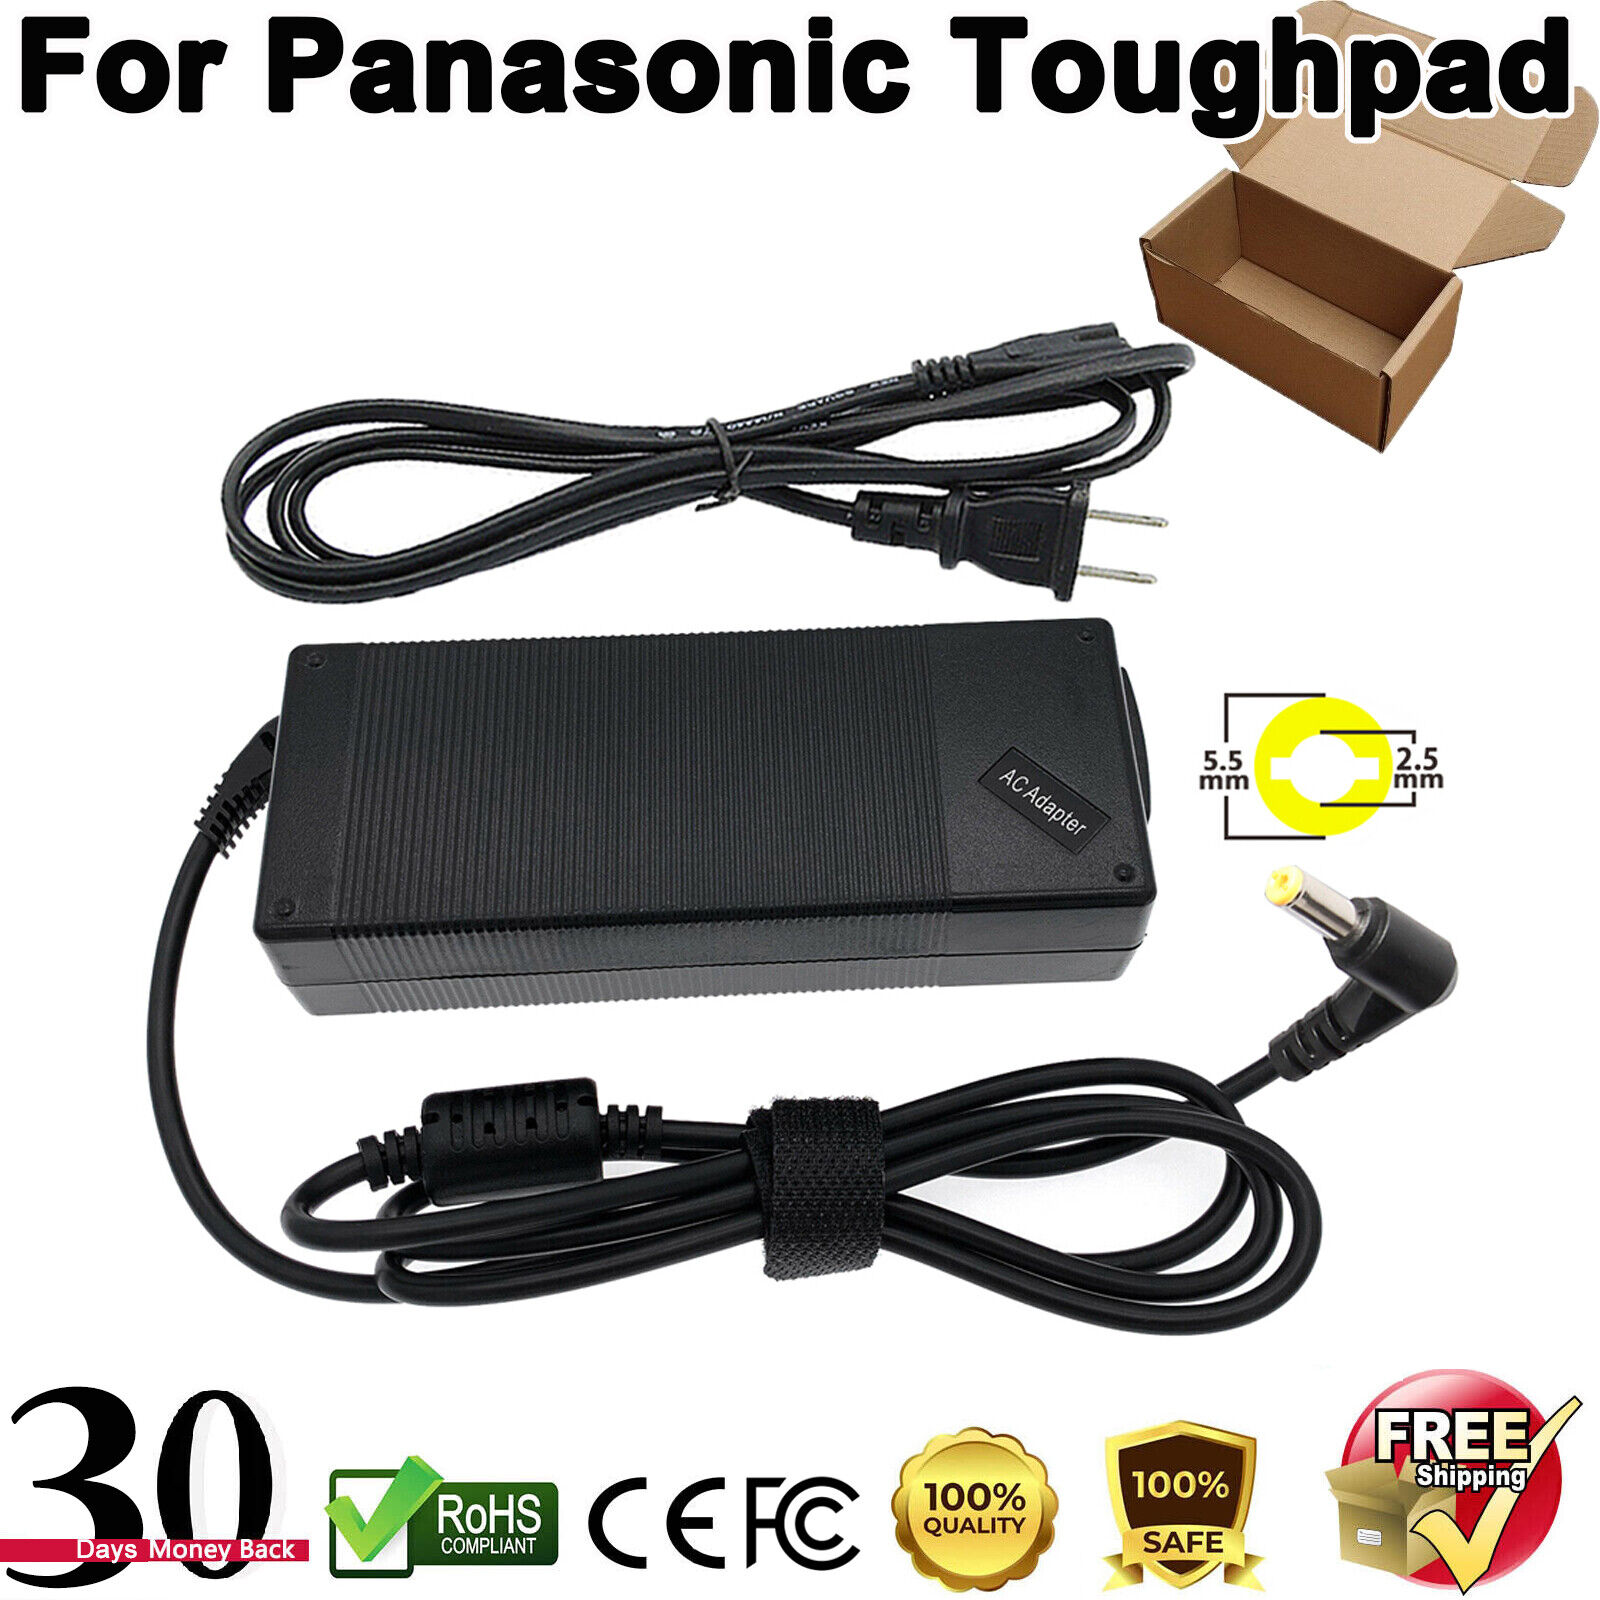 16V AC Power Adapter Charger Cord For Panasonic Toughpad FZ-G1 FZ-M1 4K Tablet